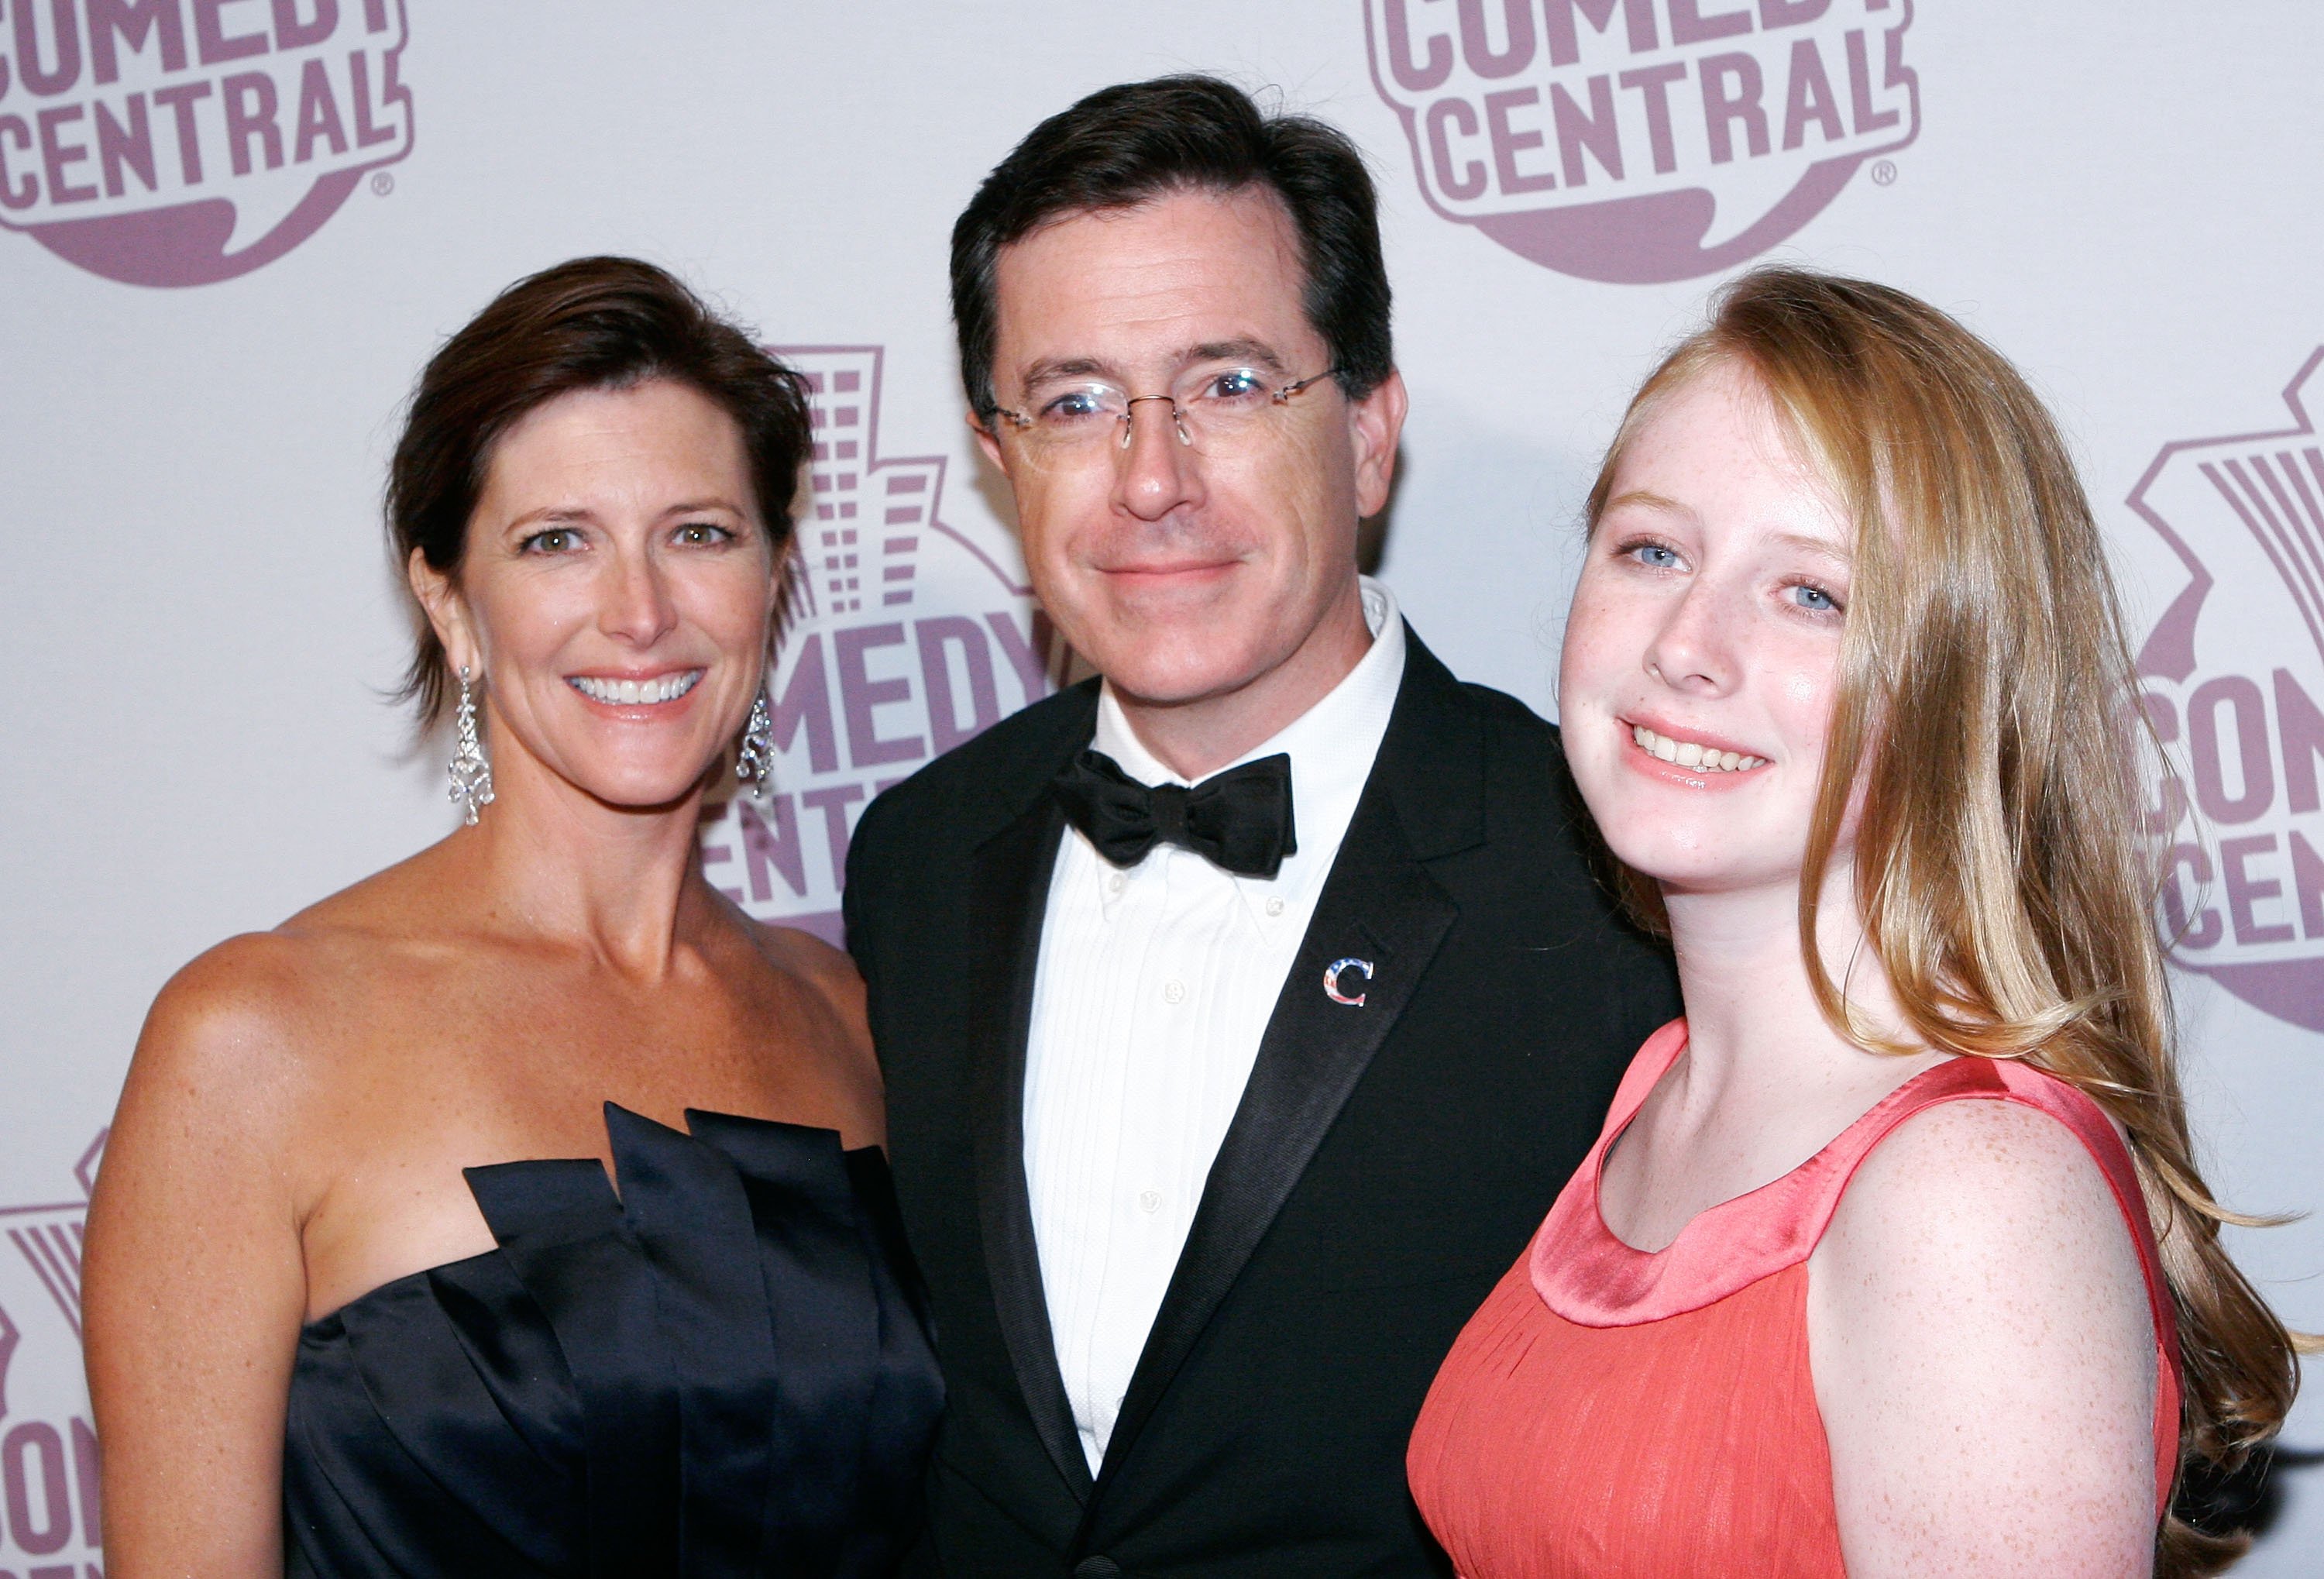  (L-R) Evelyn McGee-Colbert, her husband television personality Stephen Colbert and their daughter Madeline Colbert arrive at the Comedy Central Emmy after party at STK September 21, 2008, in Los Angeles, California. | Source: Getty Images